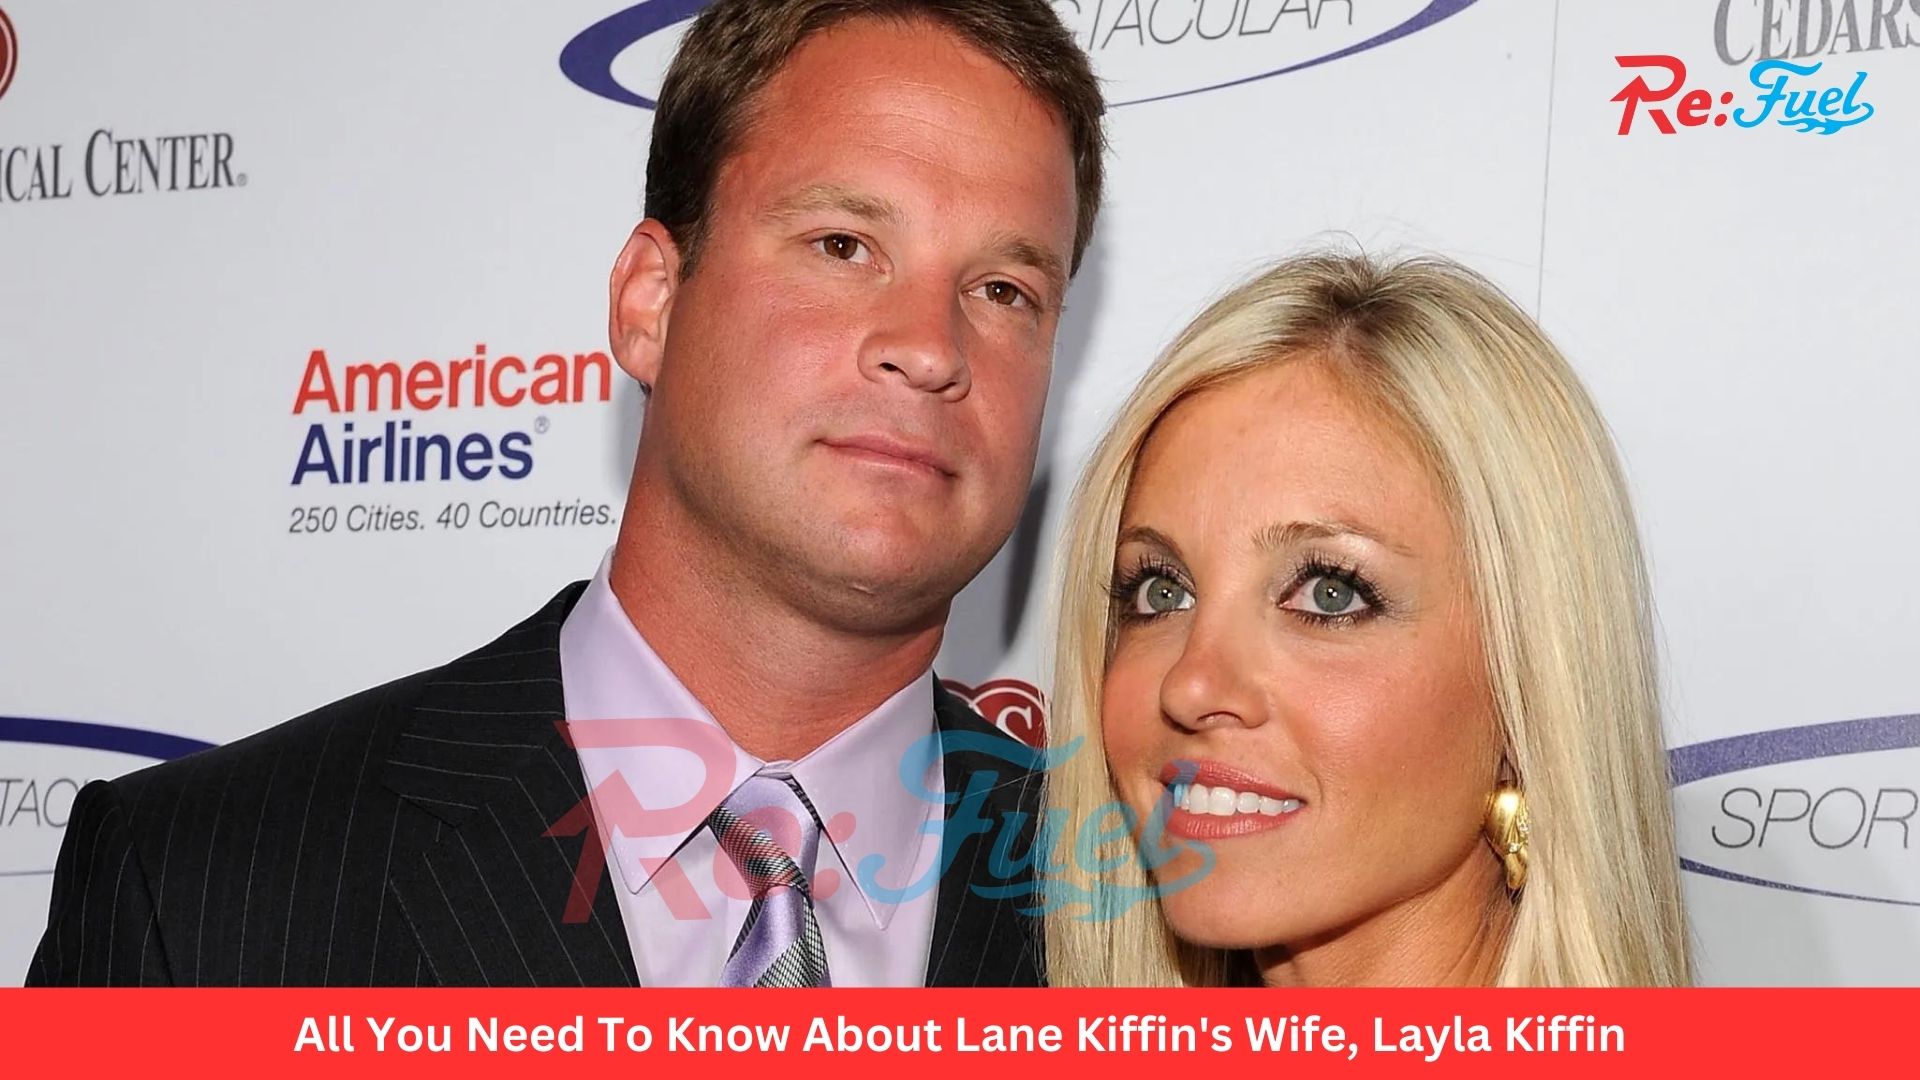 All You Need To Know About Lane Kiffin's Wife, Layla Kiffin